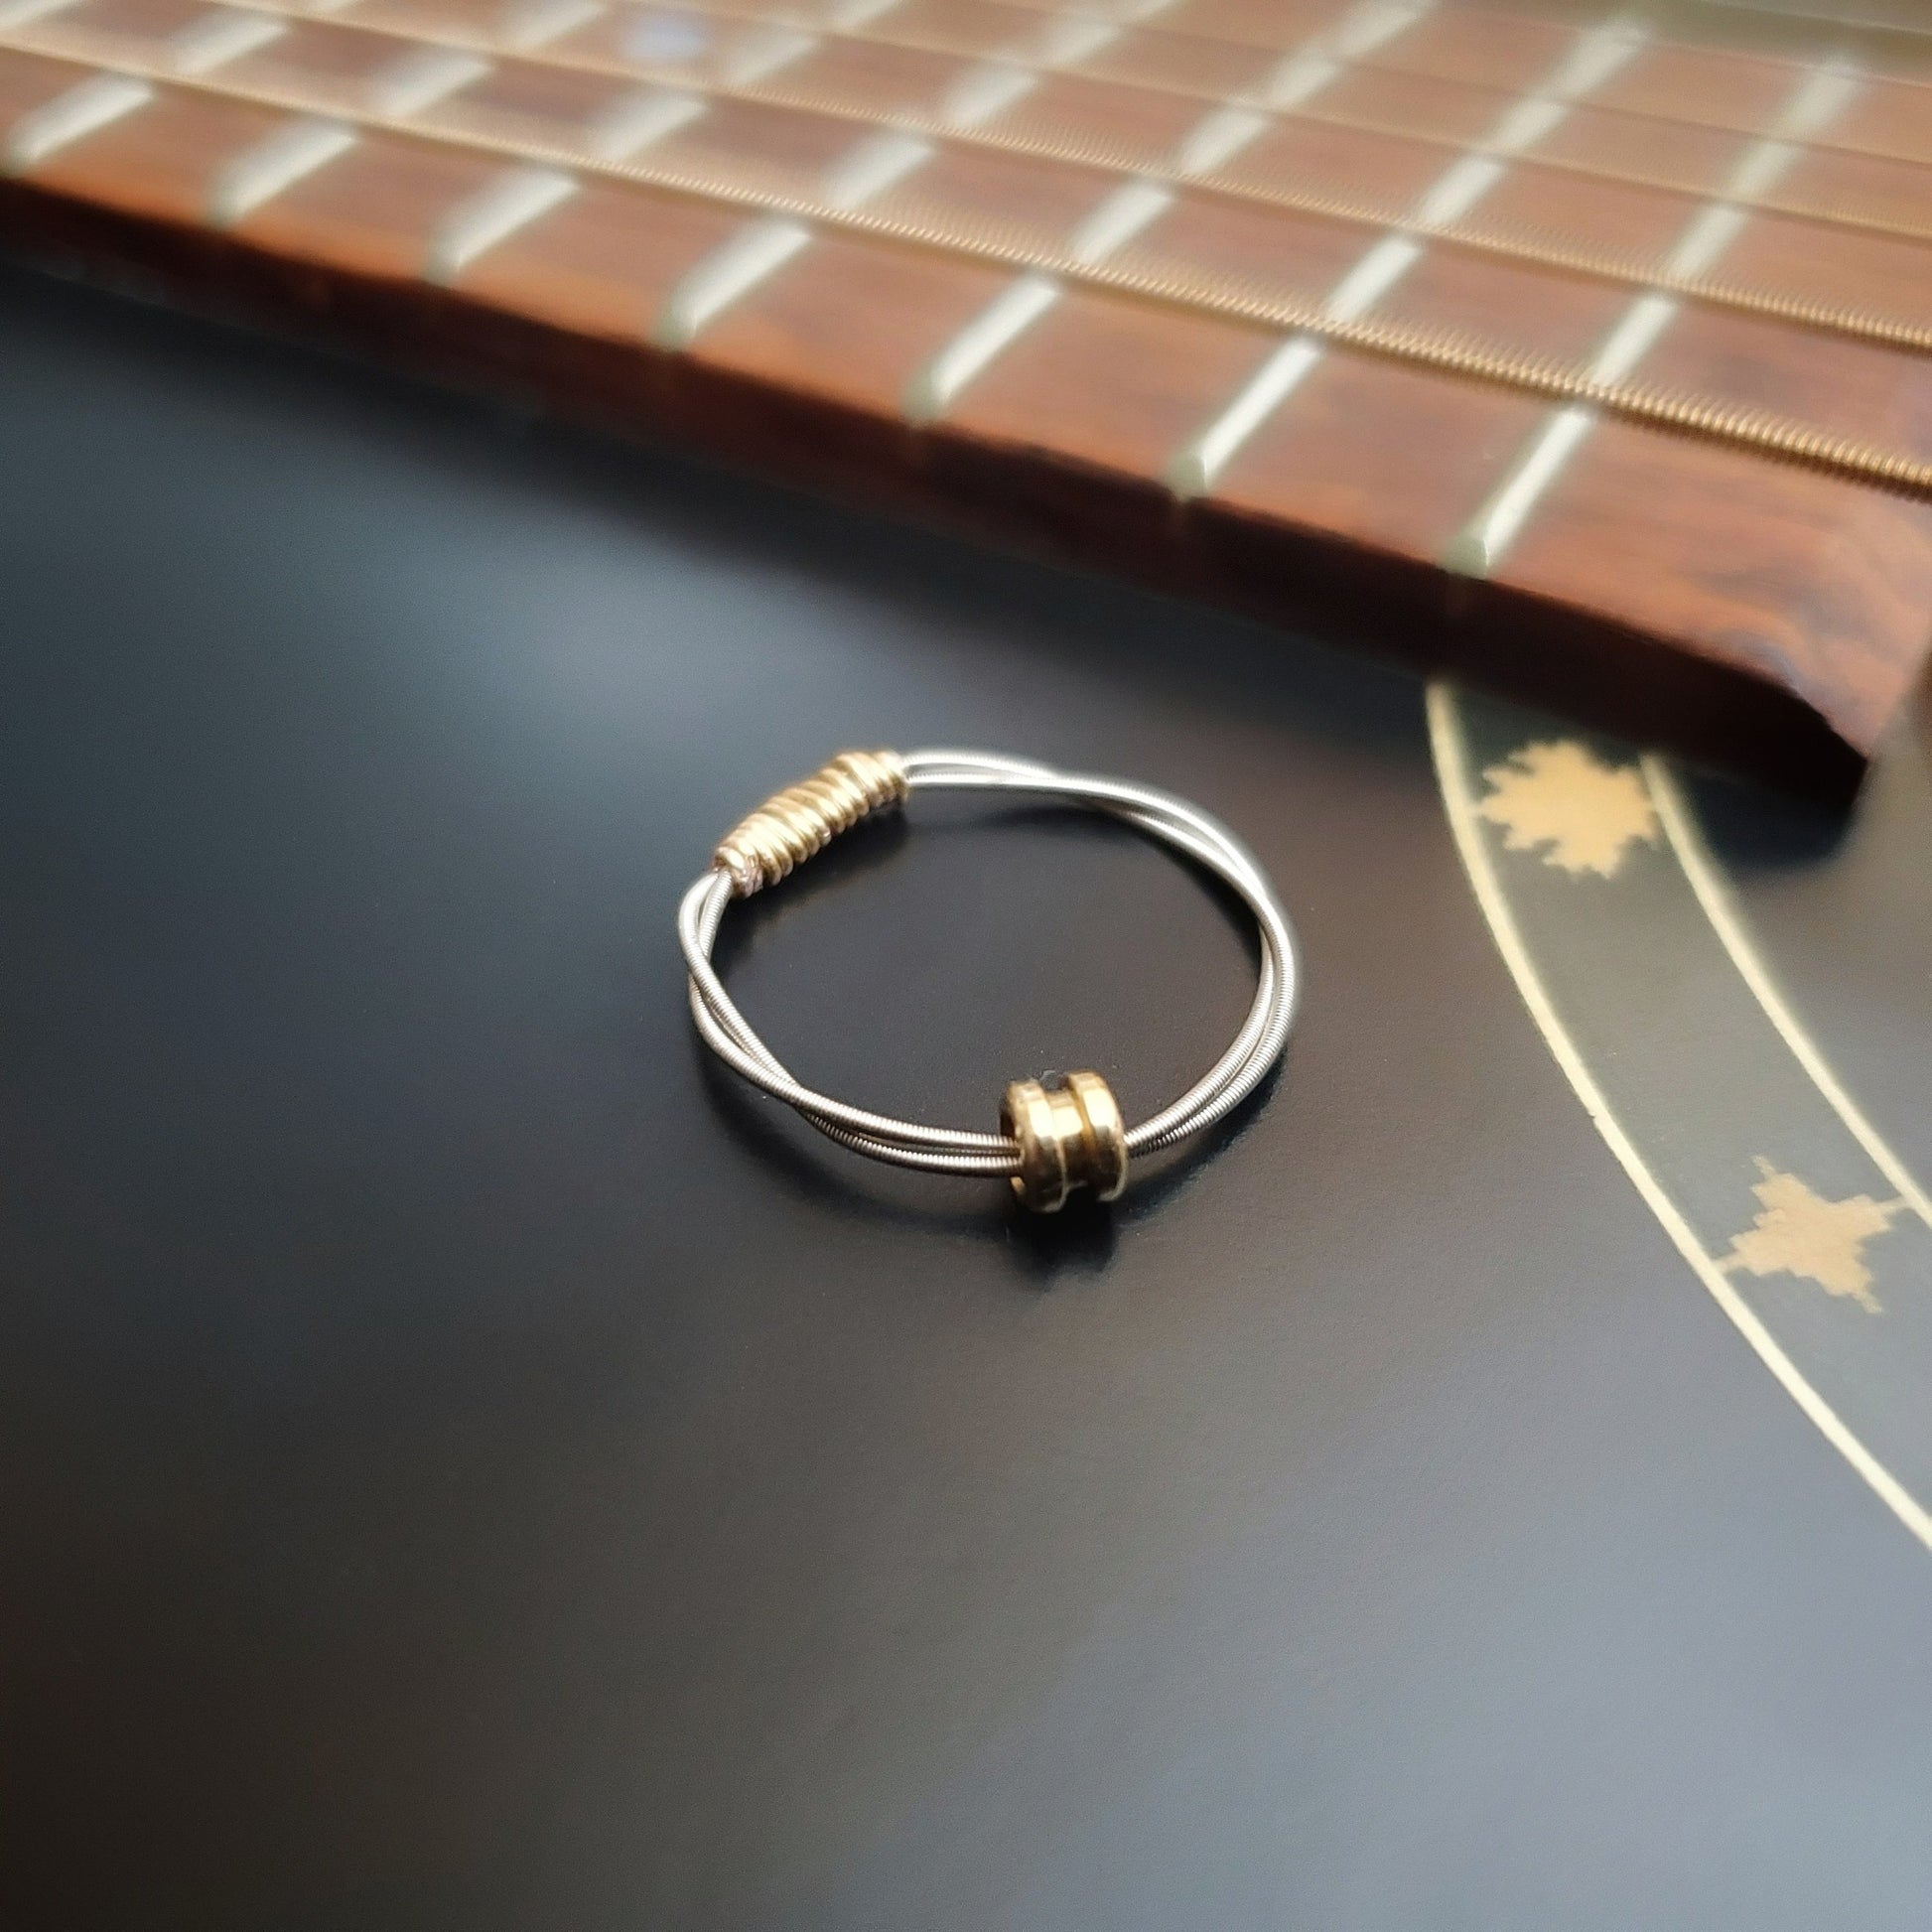 guitar string fidget ring with a gold coloured ballend sitting on a black guitar